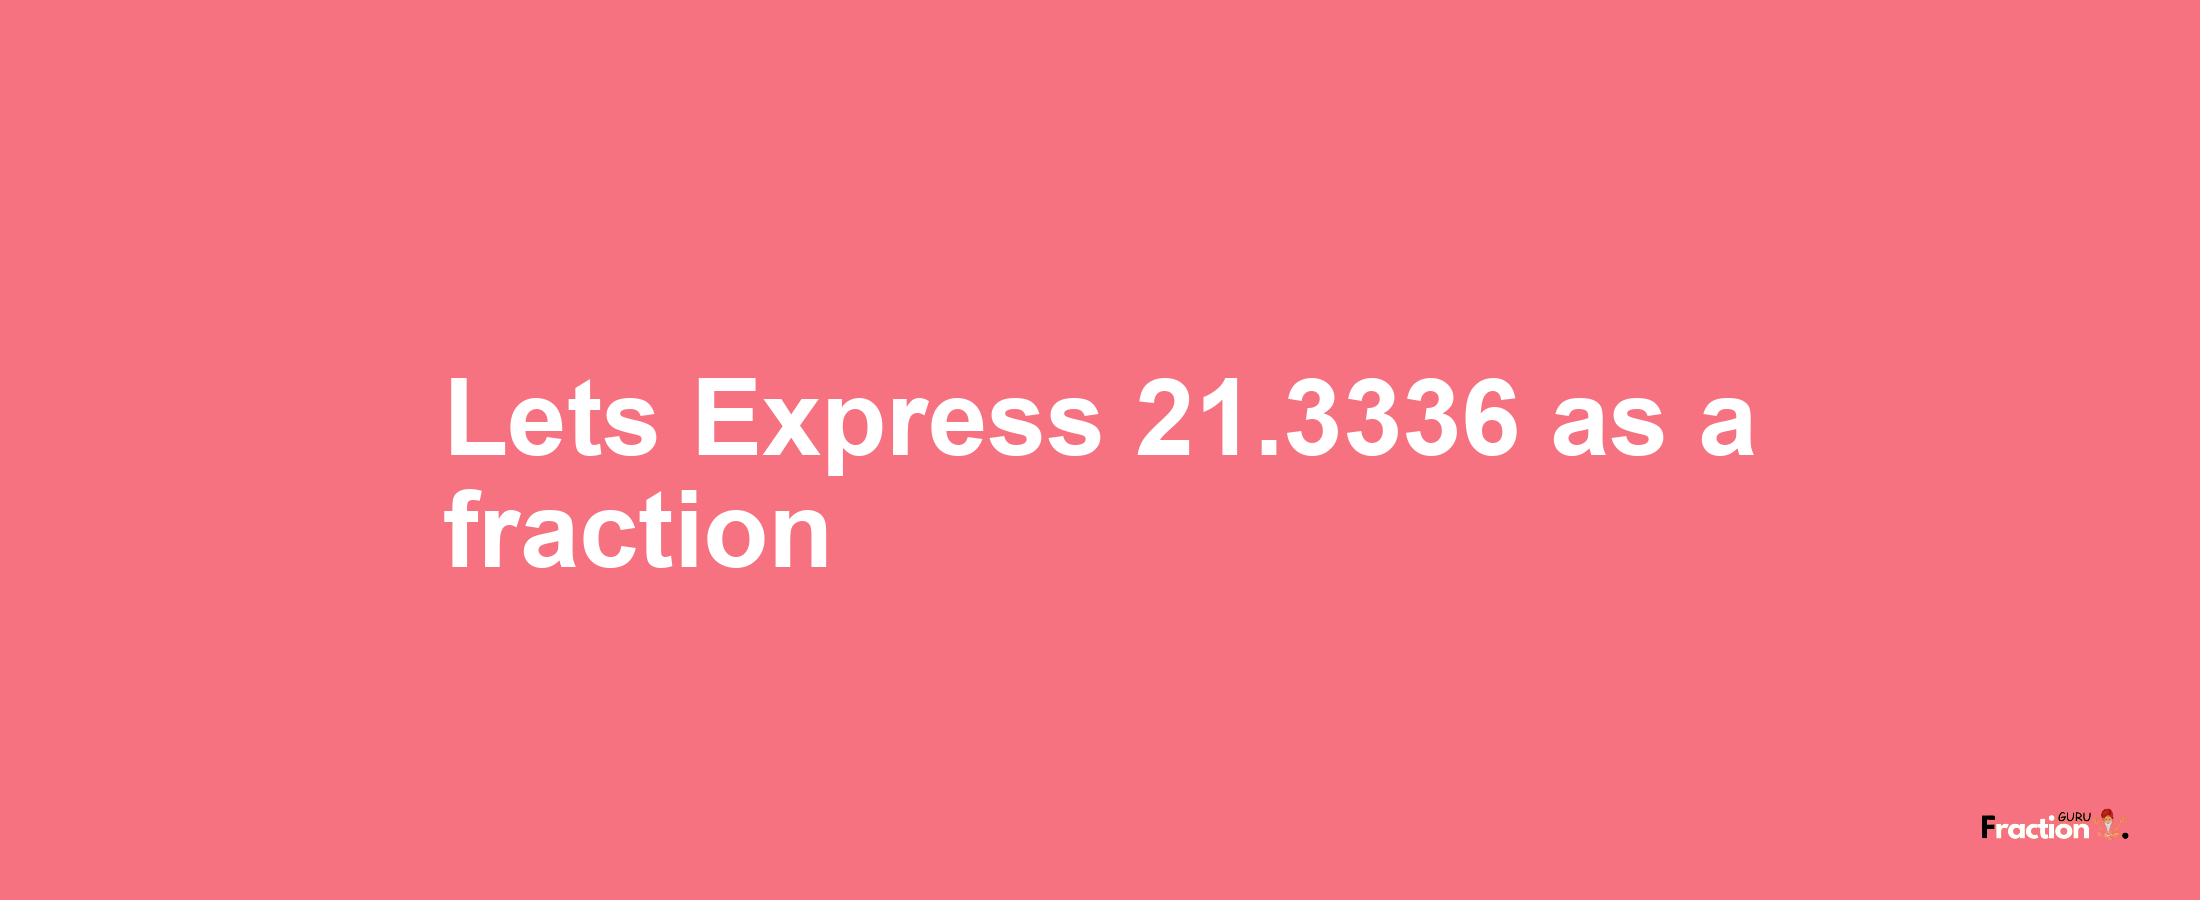 Lets Express 21.3336 as afraction